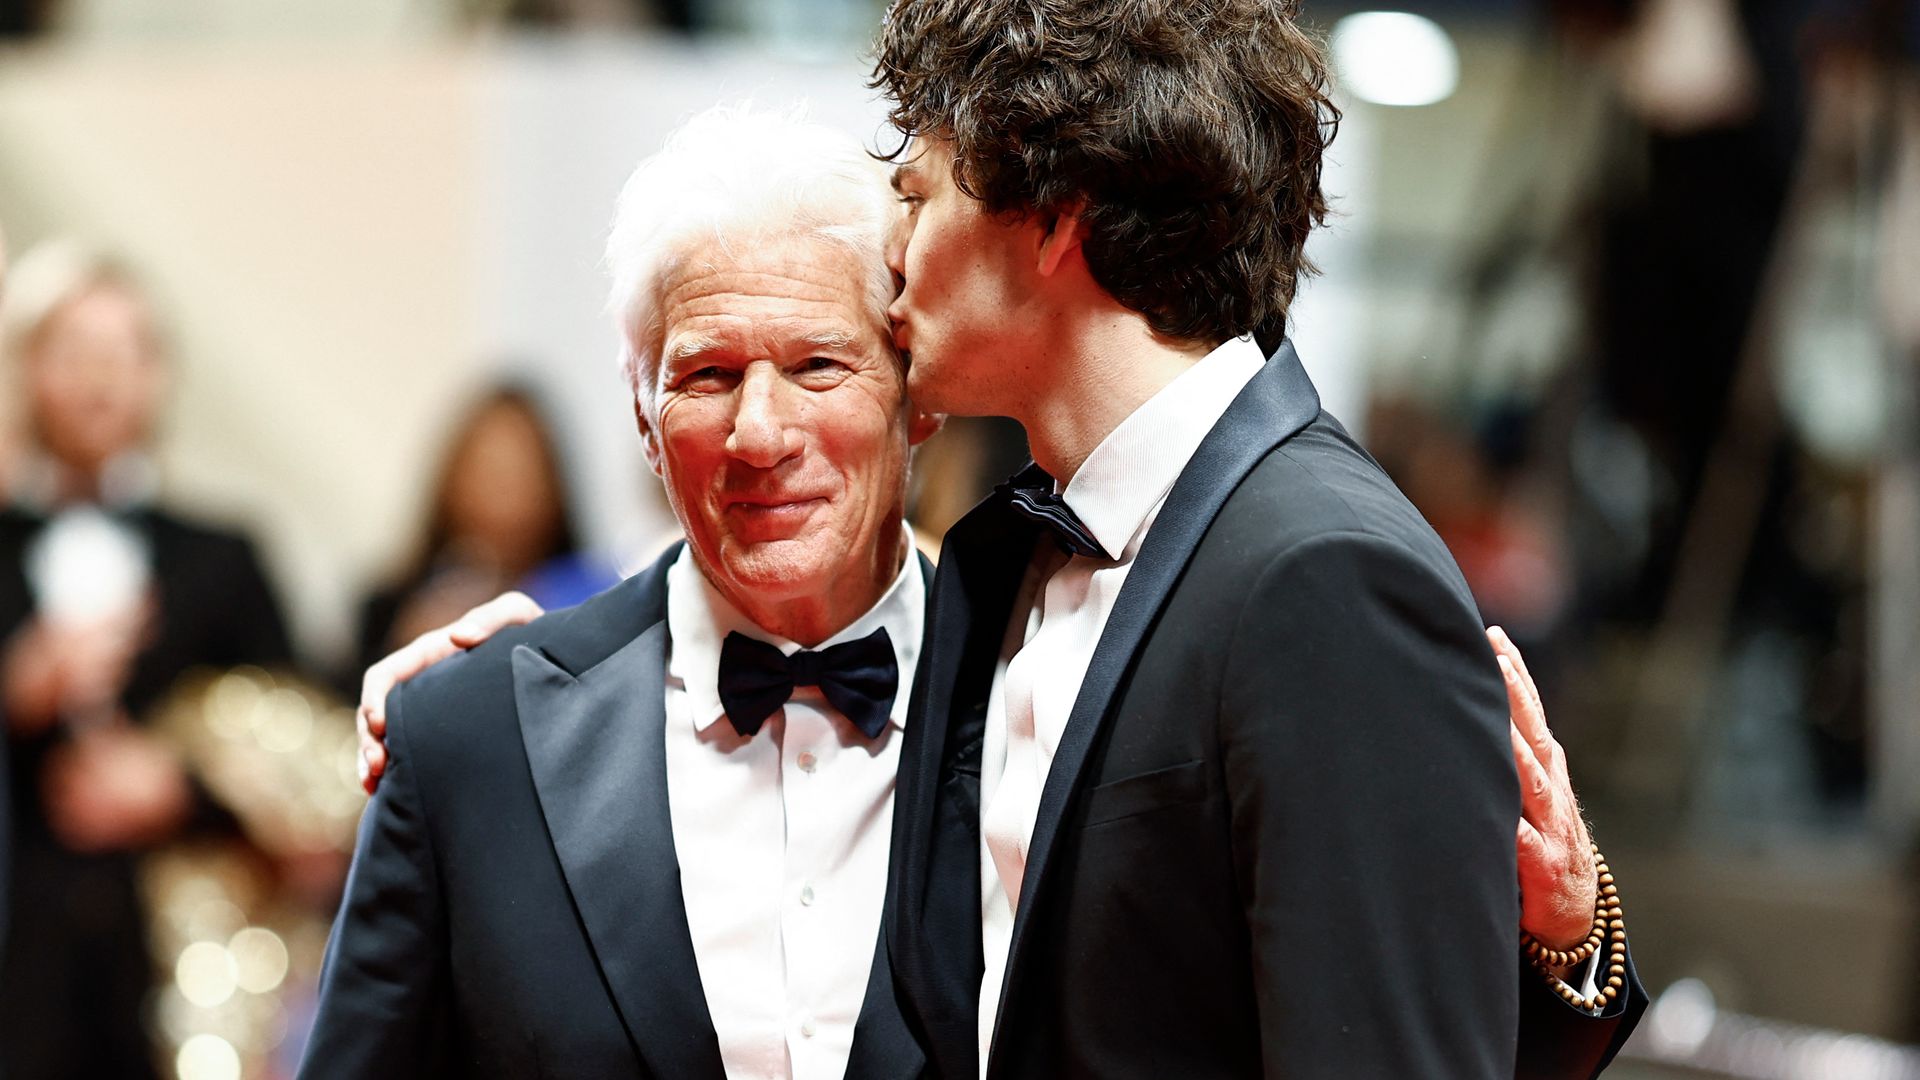 Richard Gere, 74, is joined by rarely seen 24-year-old son for Cannes premiere